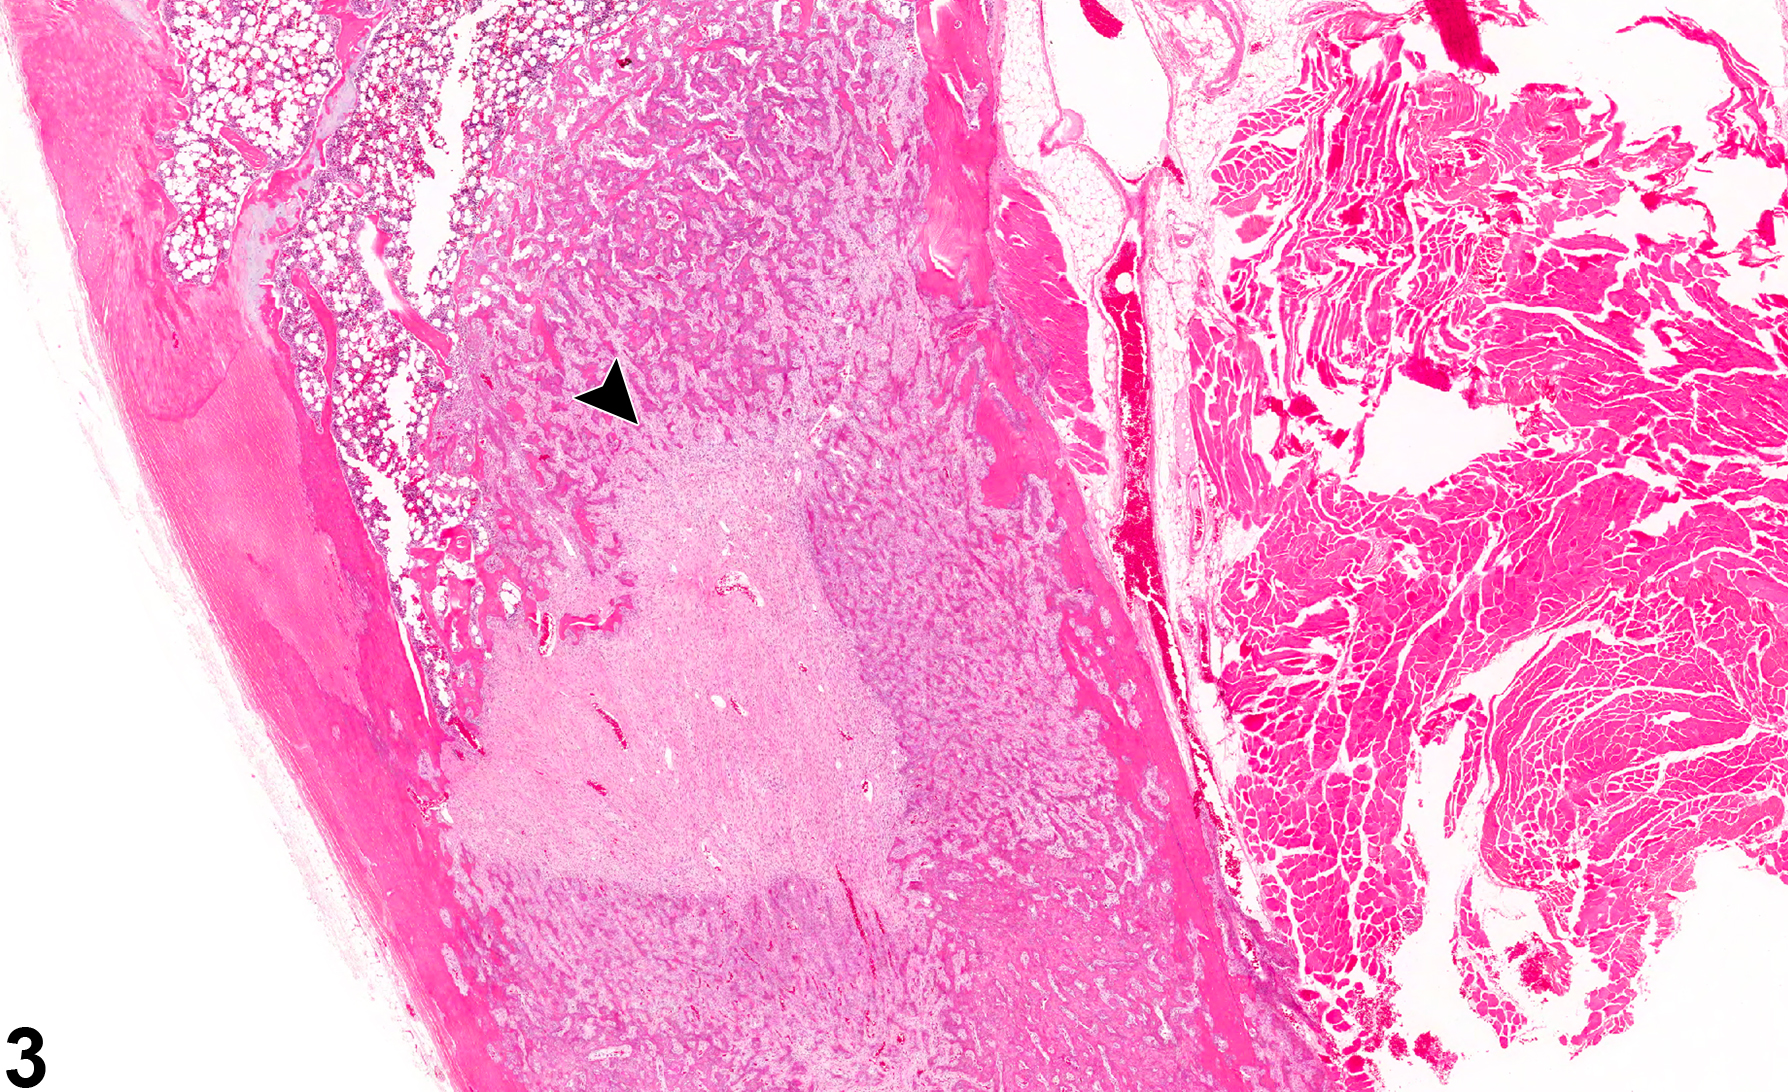 Image of callus in the bone from a male F344/N rat in a chronic study